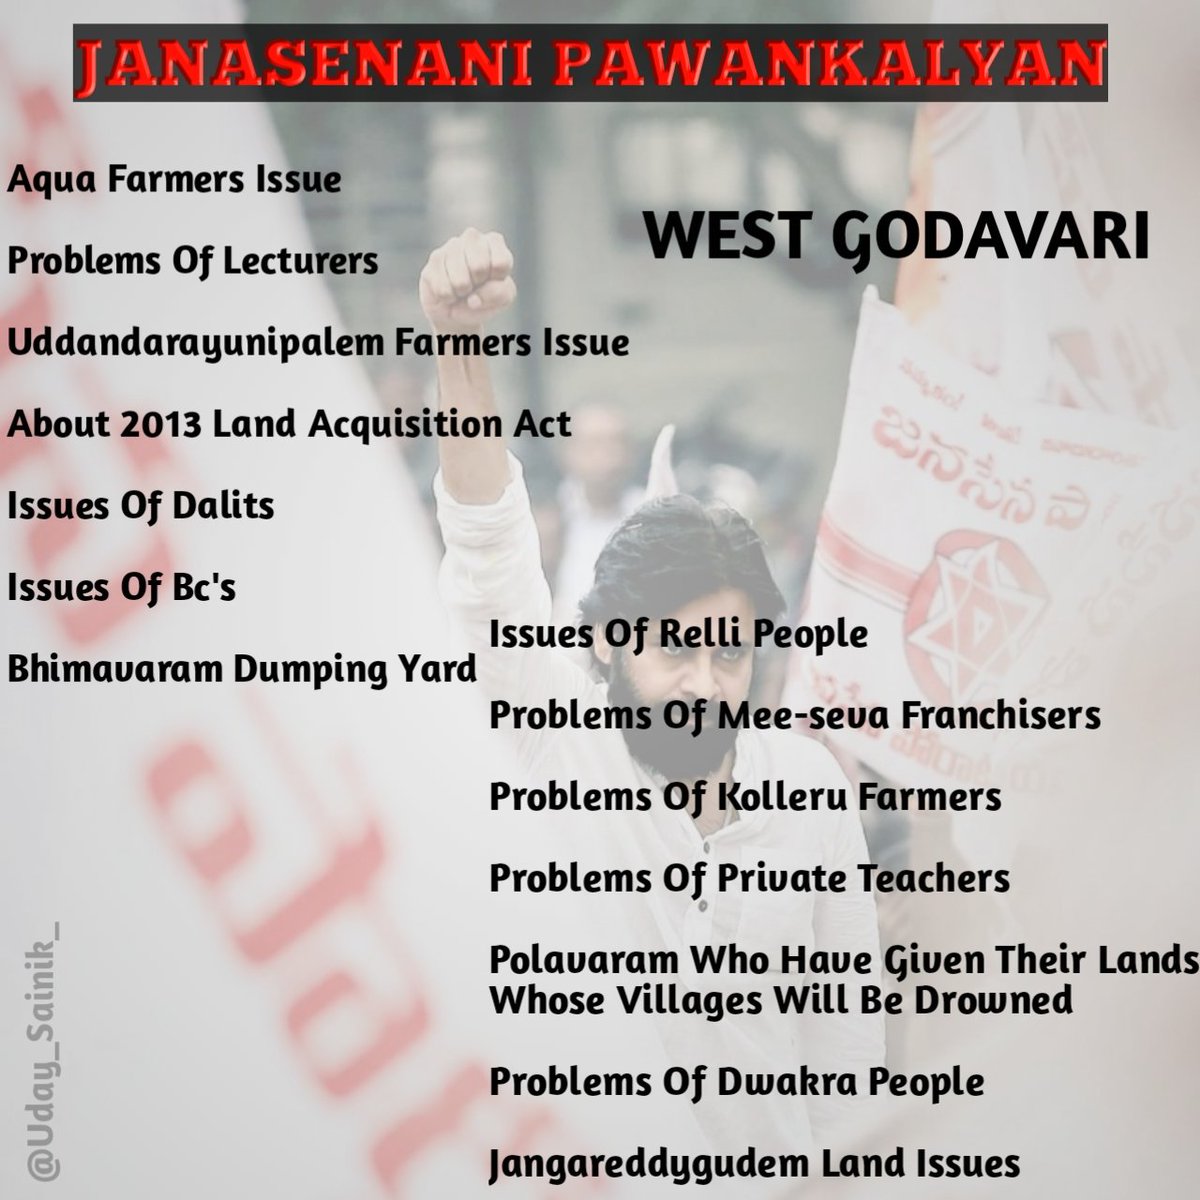 A Thread Of Pics Which gives info on fewProblems/Issues that were addressed/solved/questioned&raised by Our Janasenani  @PawanKalyan over the years before elections....